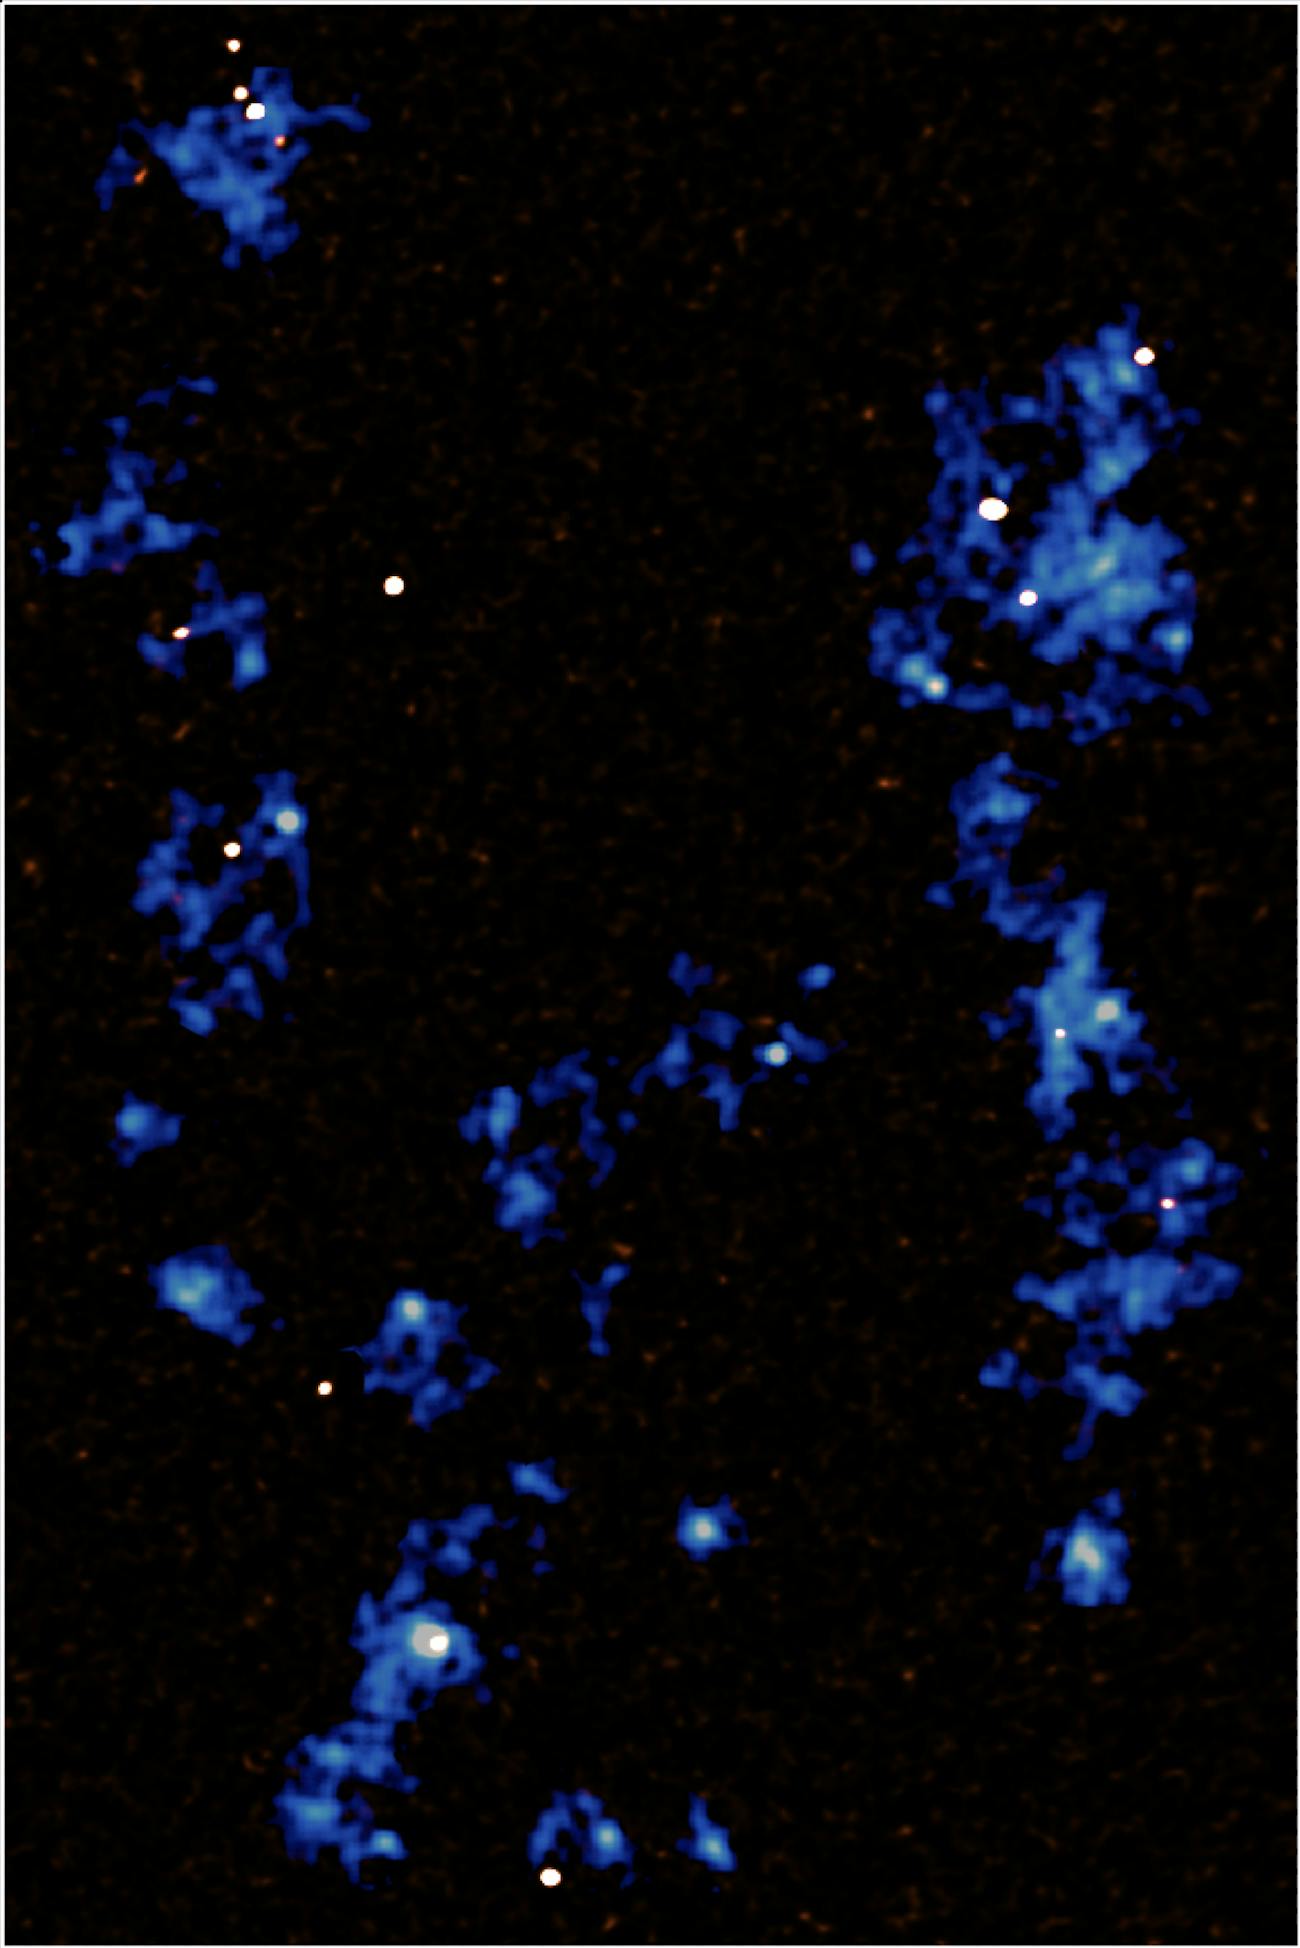 This map shows the gas filaments (blue) that run from the top to the bottom of the image, detected using the MUSE instrument at the Very Large Telescope. The white dots embedded within these filaments are very active star forming galaxies which are being fed by the filaments, and which are detected using the Atacama Large Millimeter/submillimeter array.